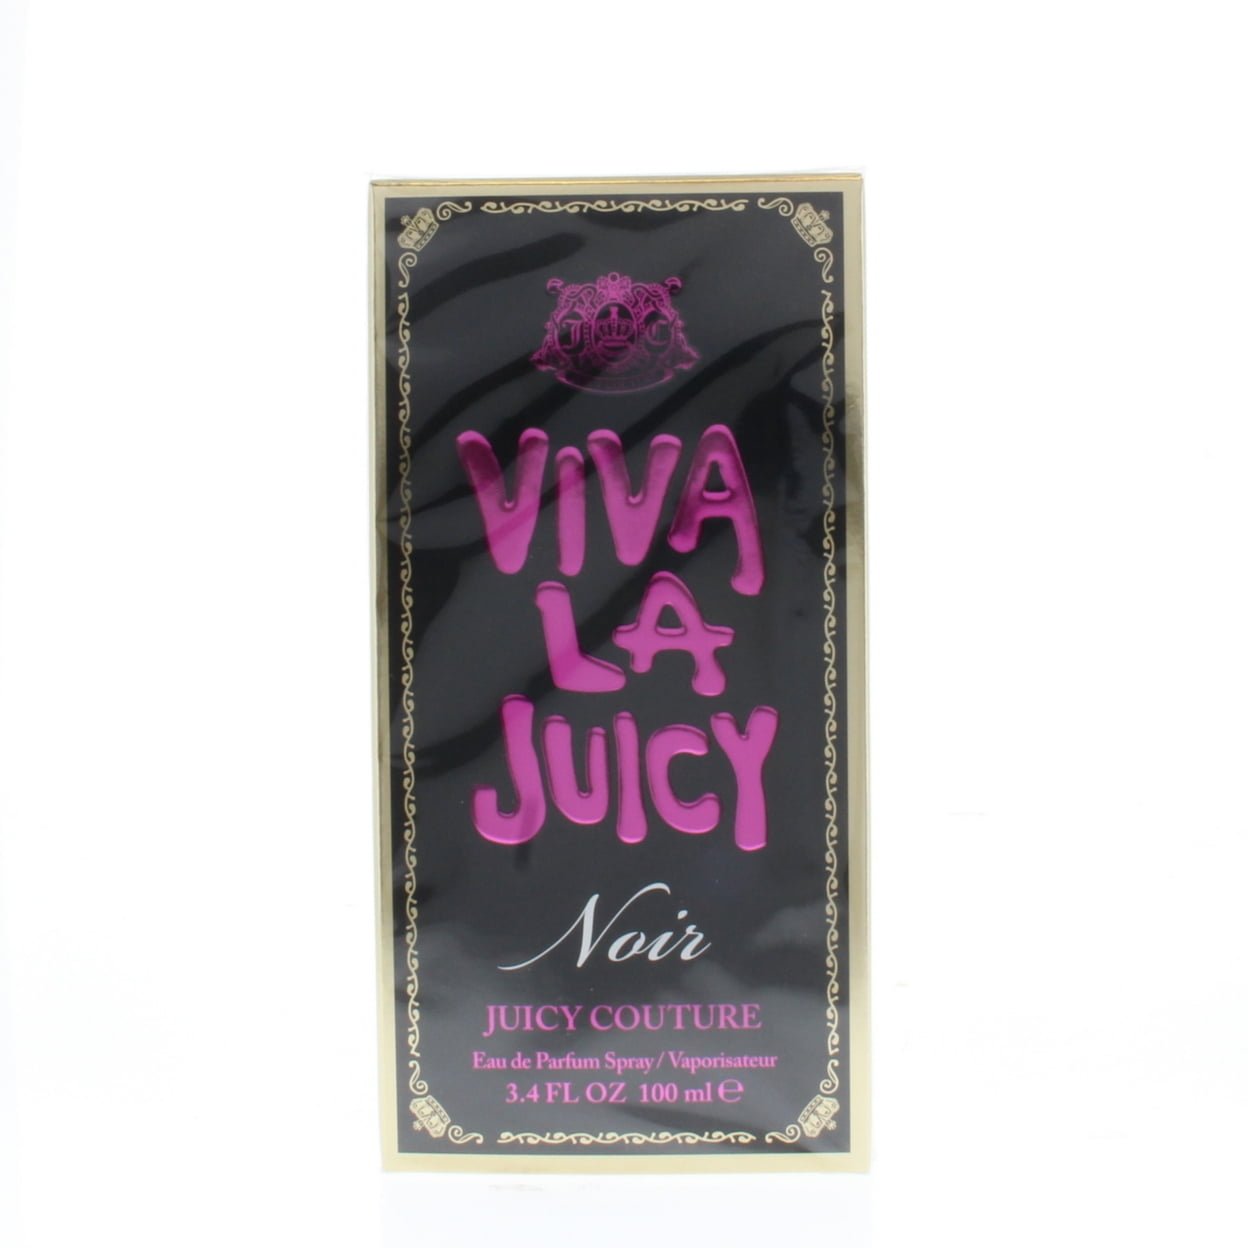 Juicy Couture Black Label Juicy Couture Rebel Without Couture